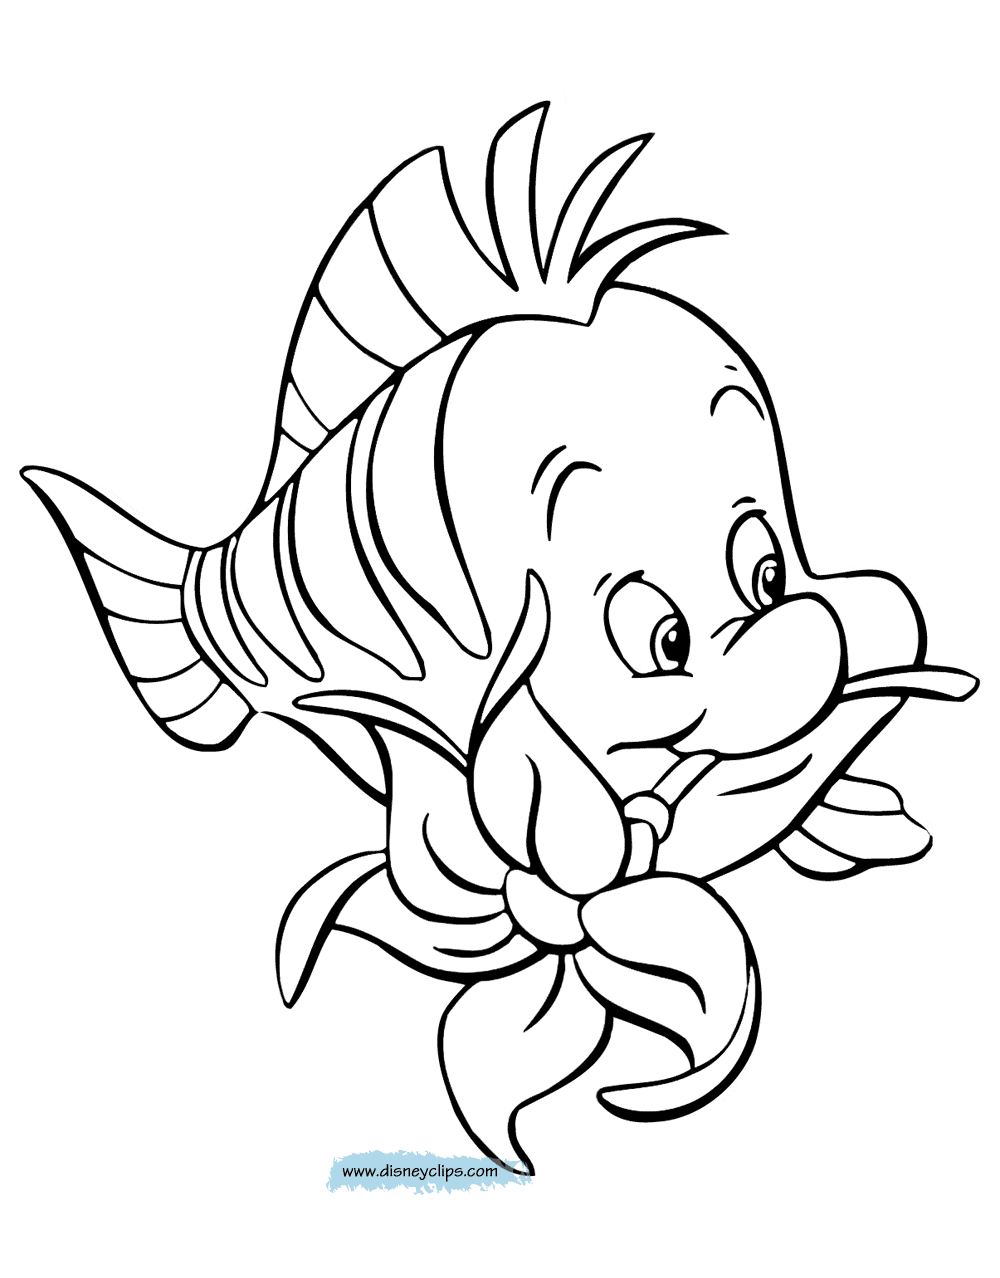 disney little mermaid coloring pages the little mermaid coloring pages 2 disneyclipscom mermaid little coloring disney pages 